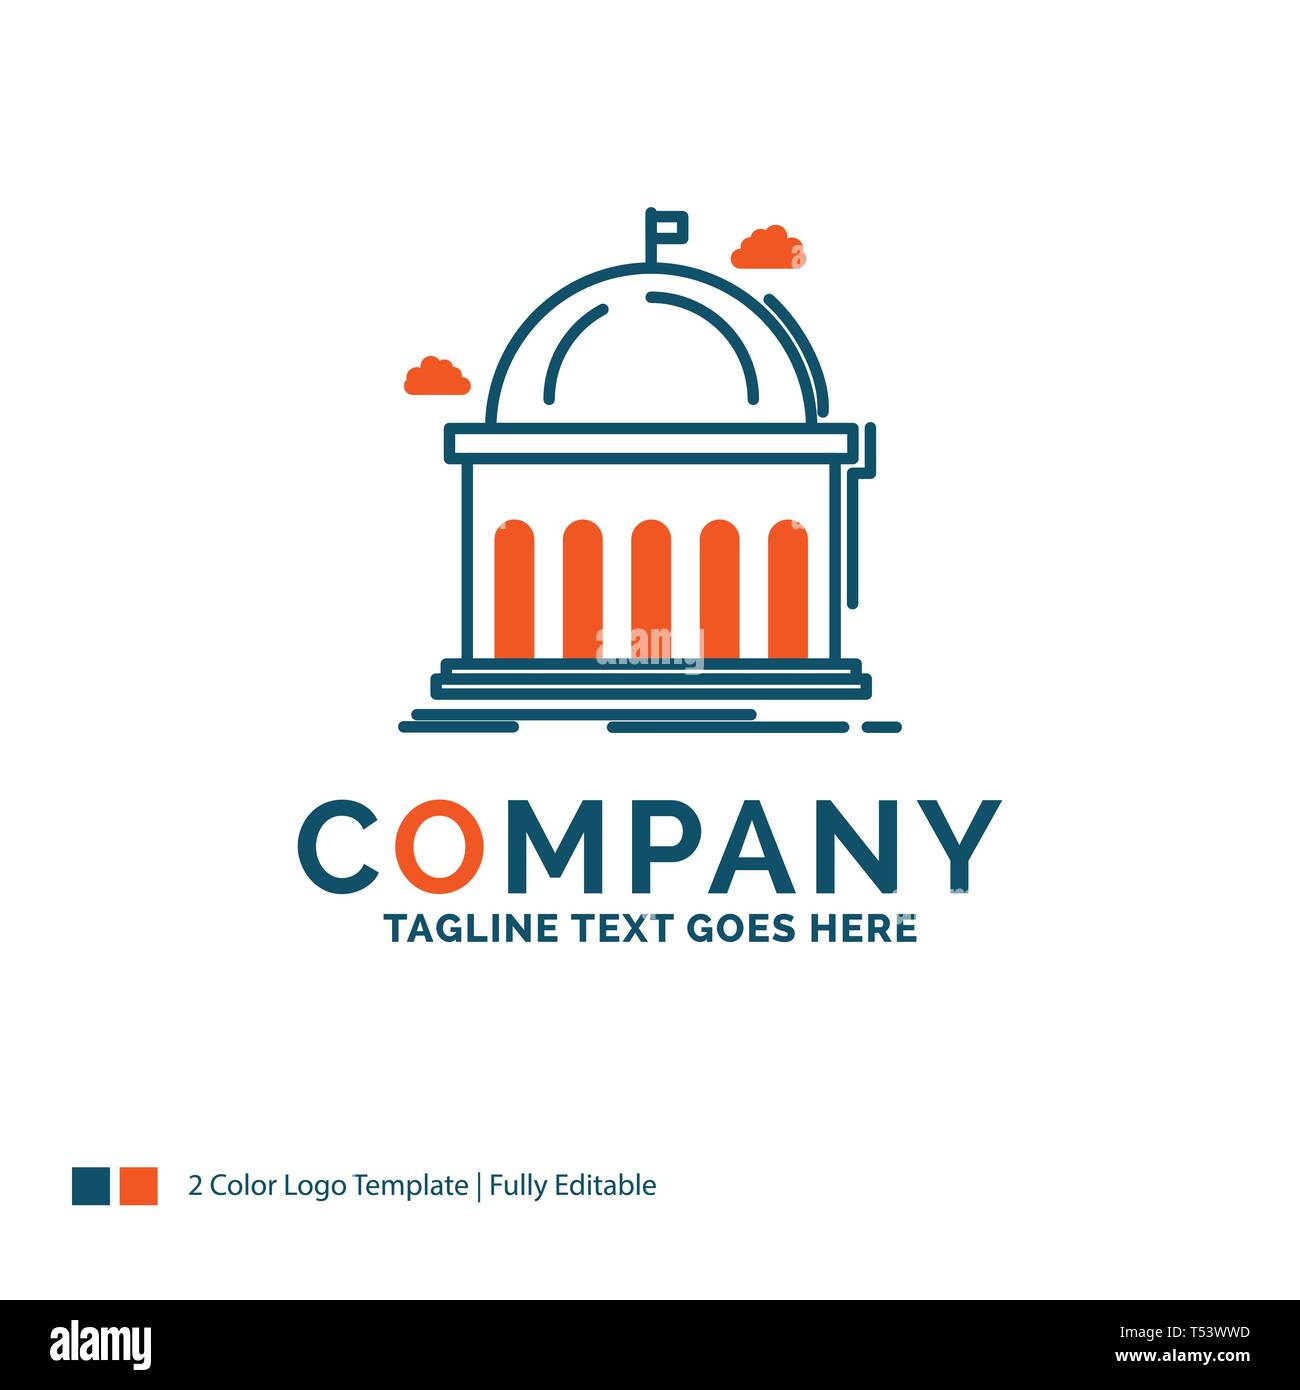 Library, school, education, learning, university Logo Design. Blue and Orange Brand Name Design. Place for Tagline. Business Logo template. Stock Vector